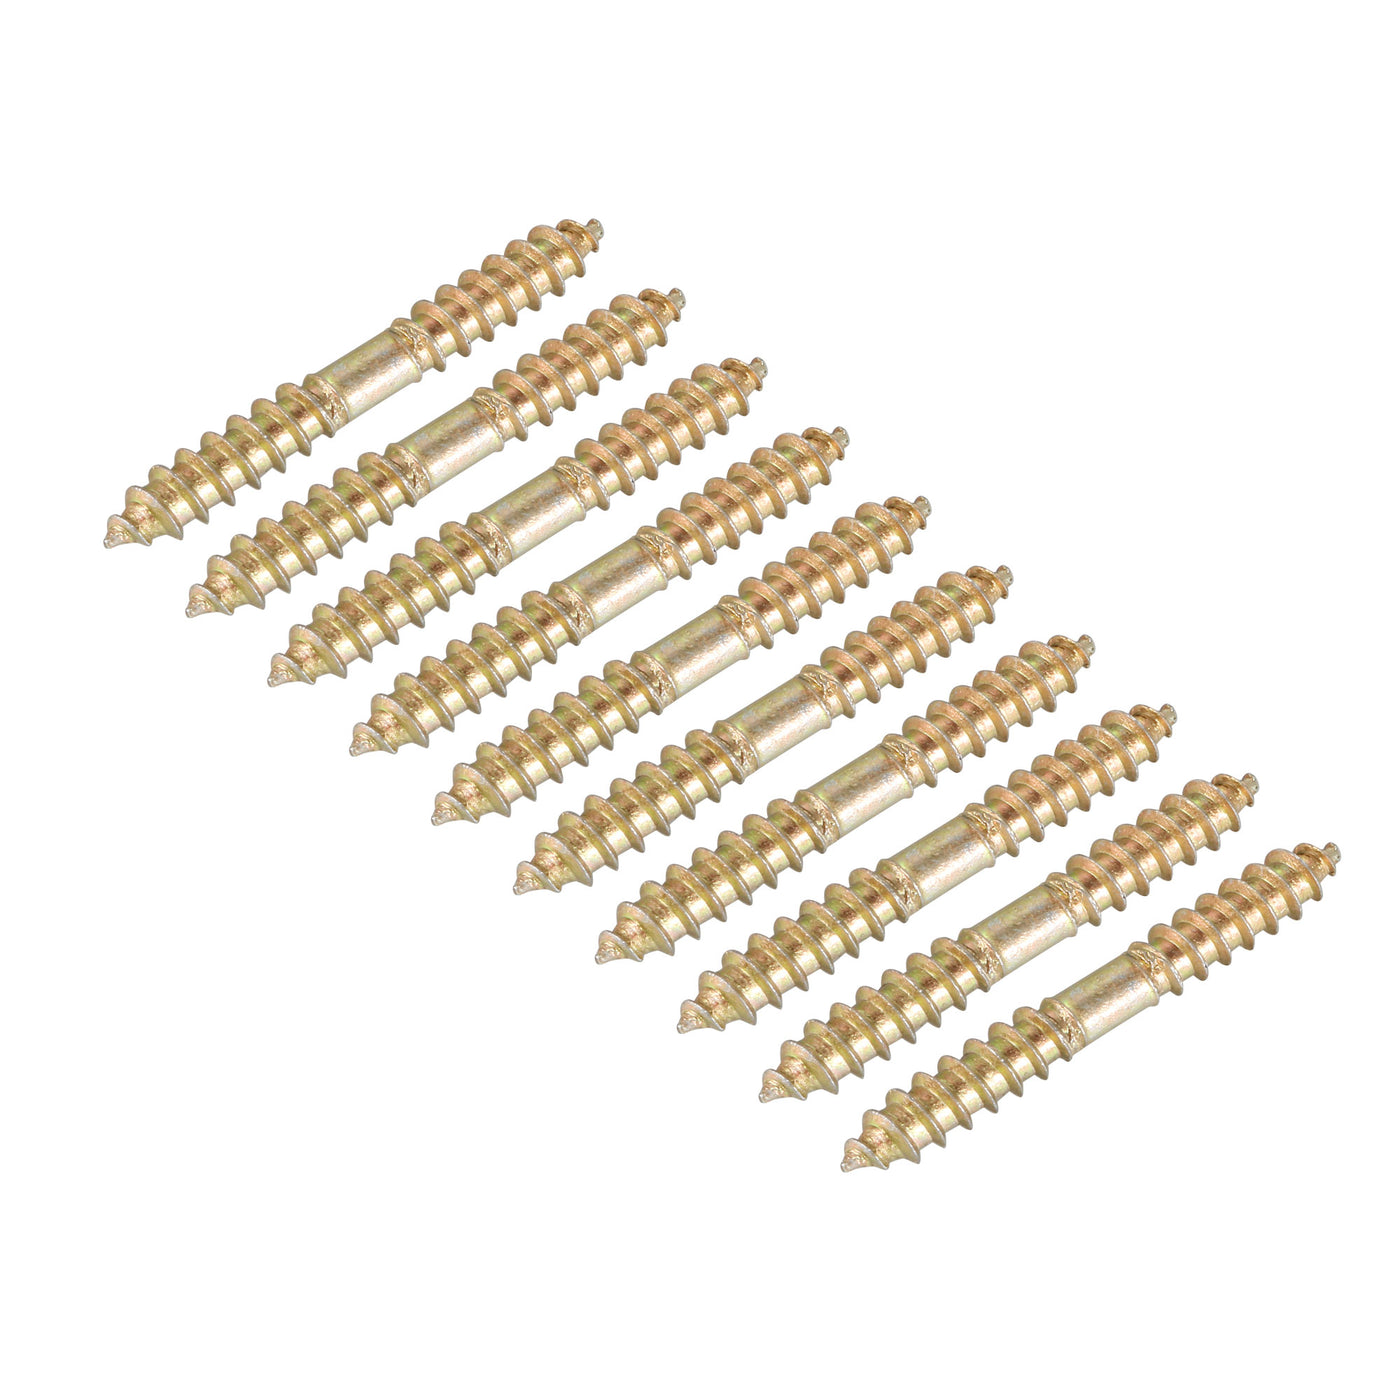 uxcell Uxcell 5x40mm Hanger Bolts, 80pcs Double Ended Thread Wood to Wood Dowel Screws